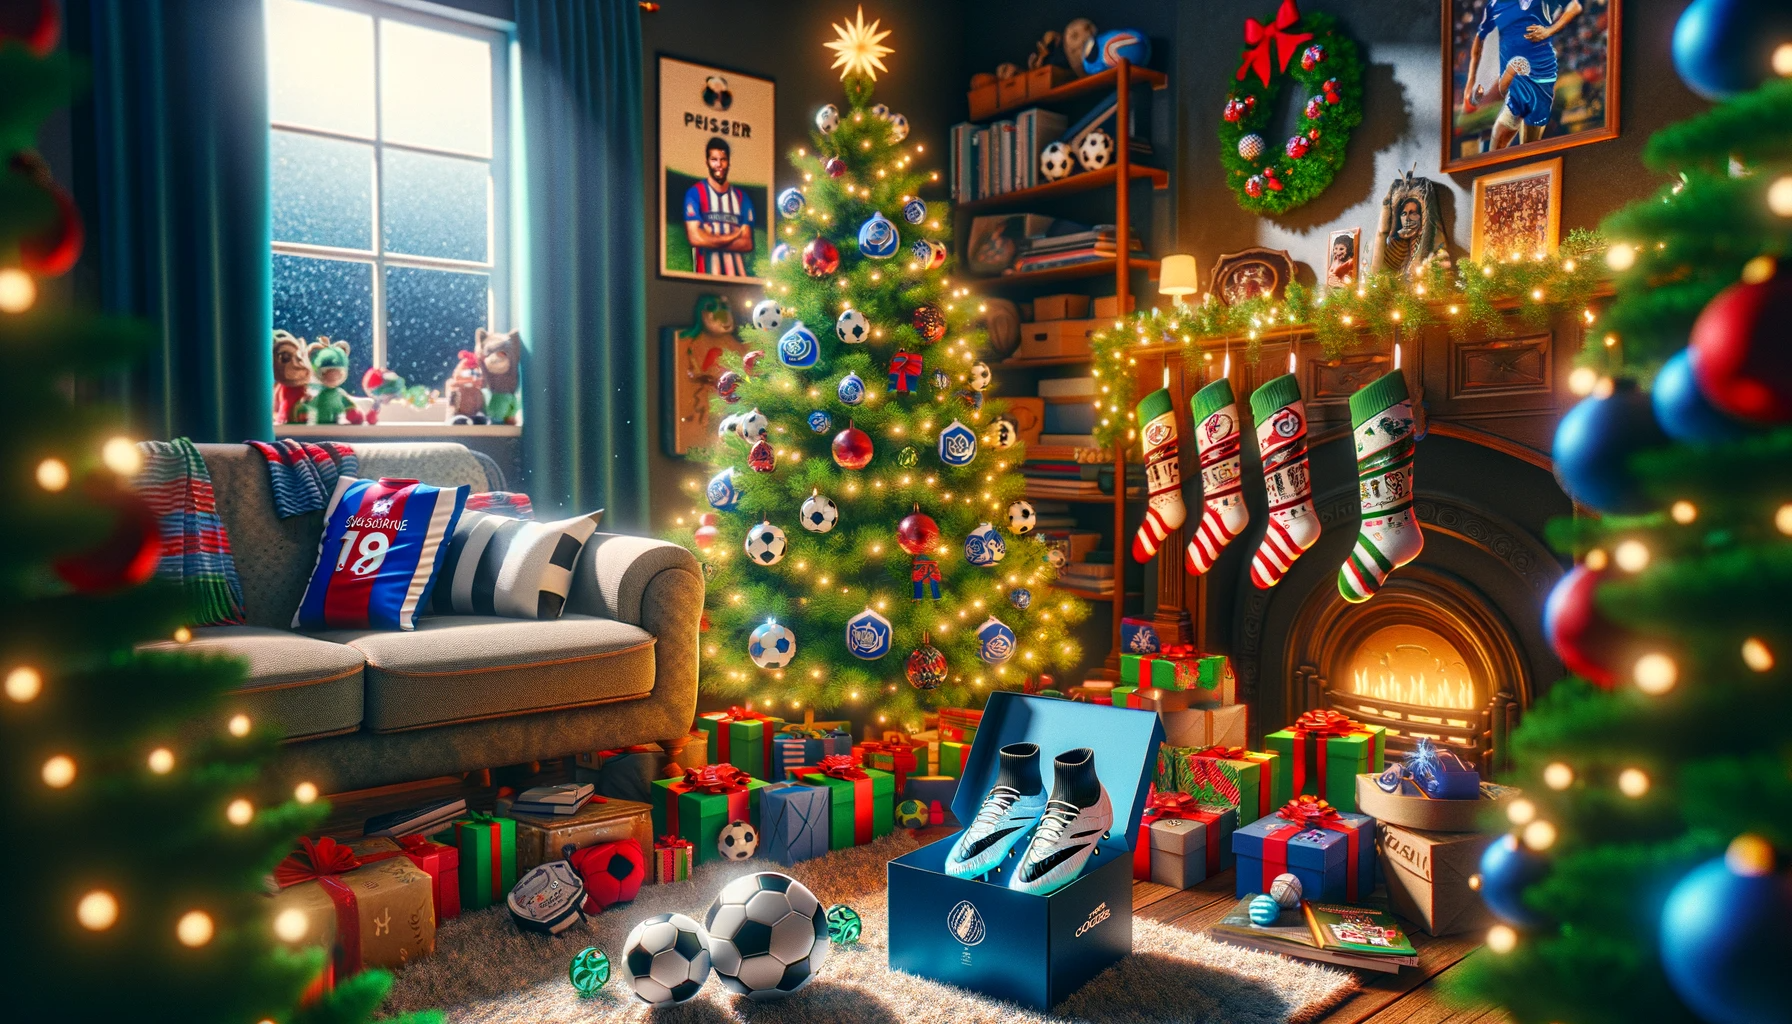 Score Big with These Soccer-Inspired Christmas Gifts for Fans and Players